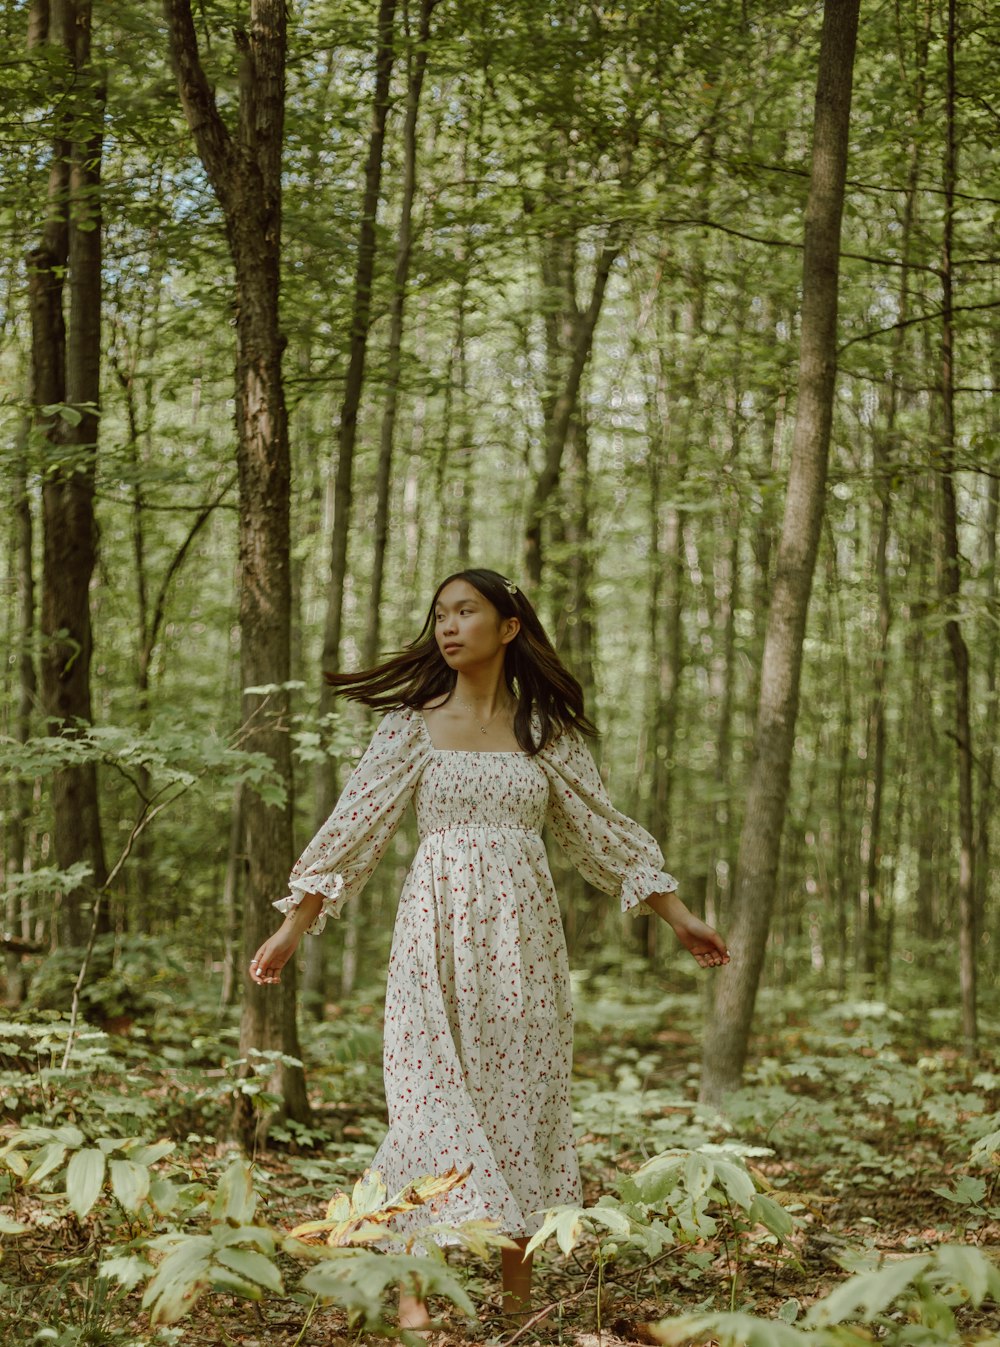 woman in white and black floral dress standing in forest during daytime